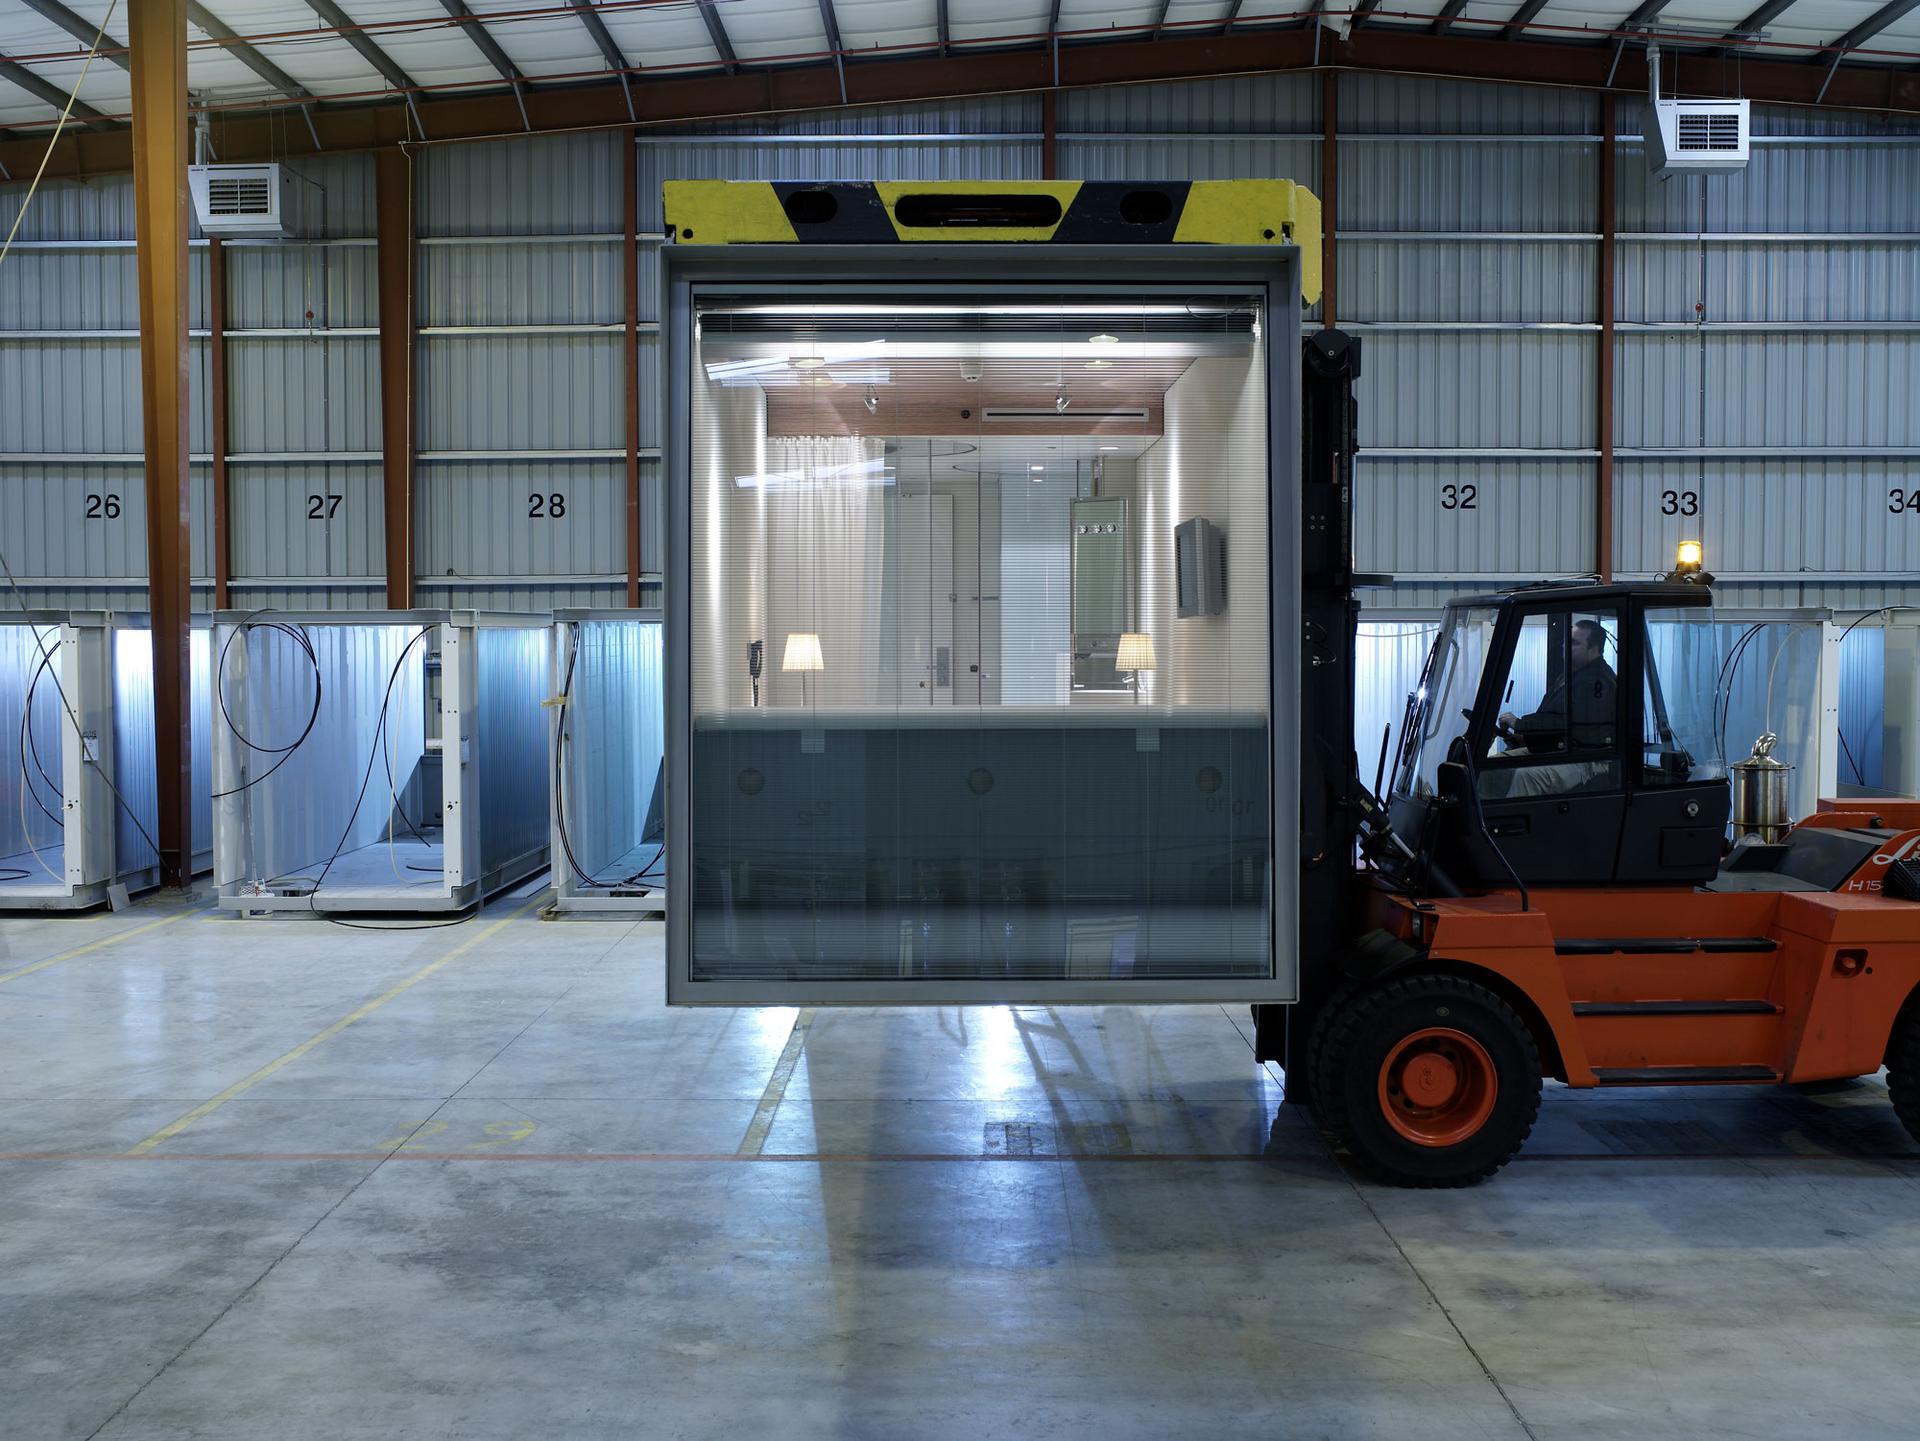 A modular apartment unit from CitizenM is shown on a factory floor being moved using a forklift.